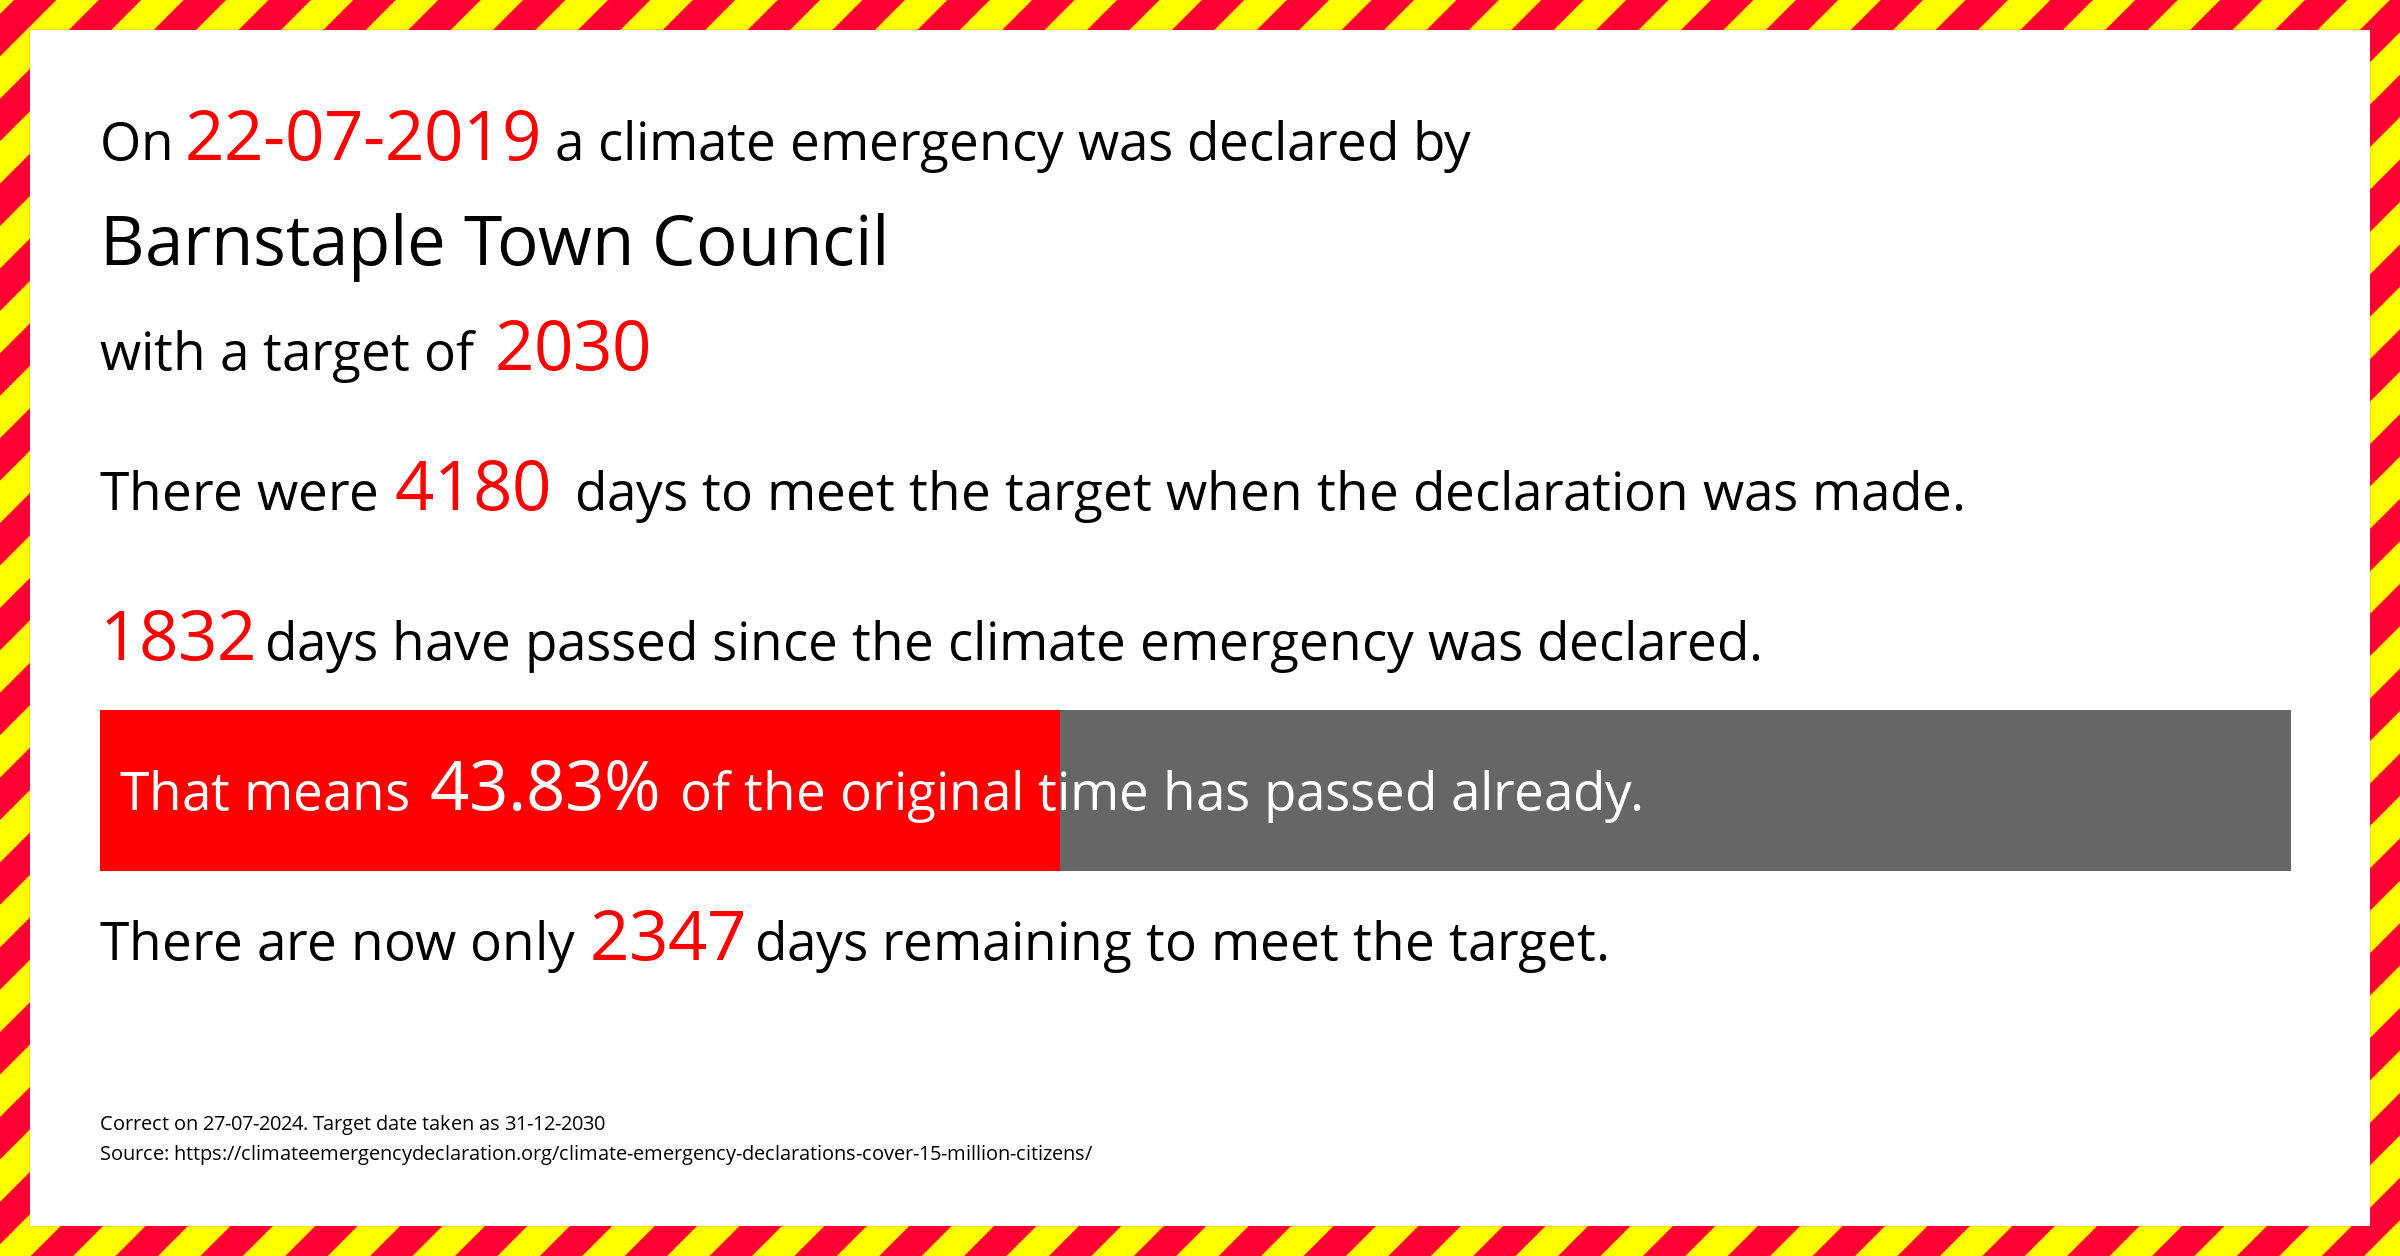 Barnstaple Town Council declared a Climate emergency on Monday 22nd July 2019, with a target of 2030.